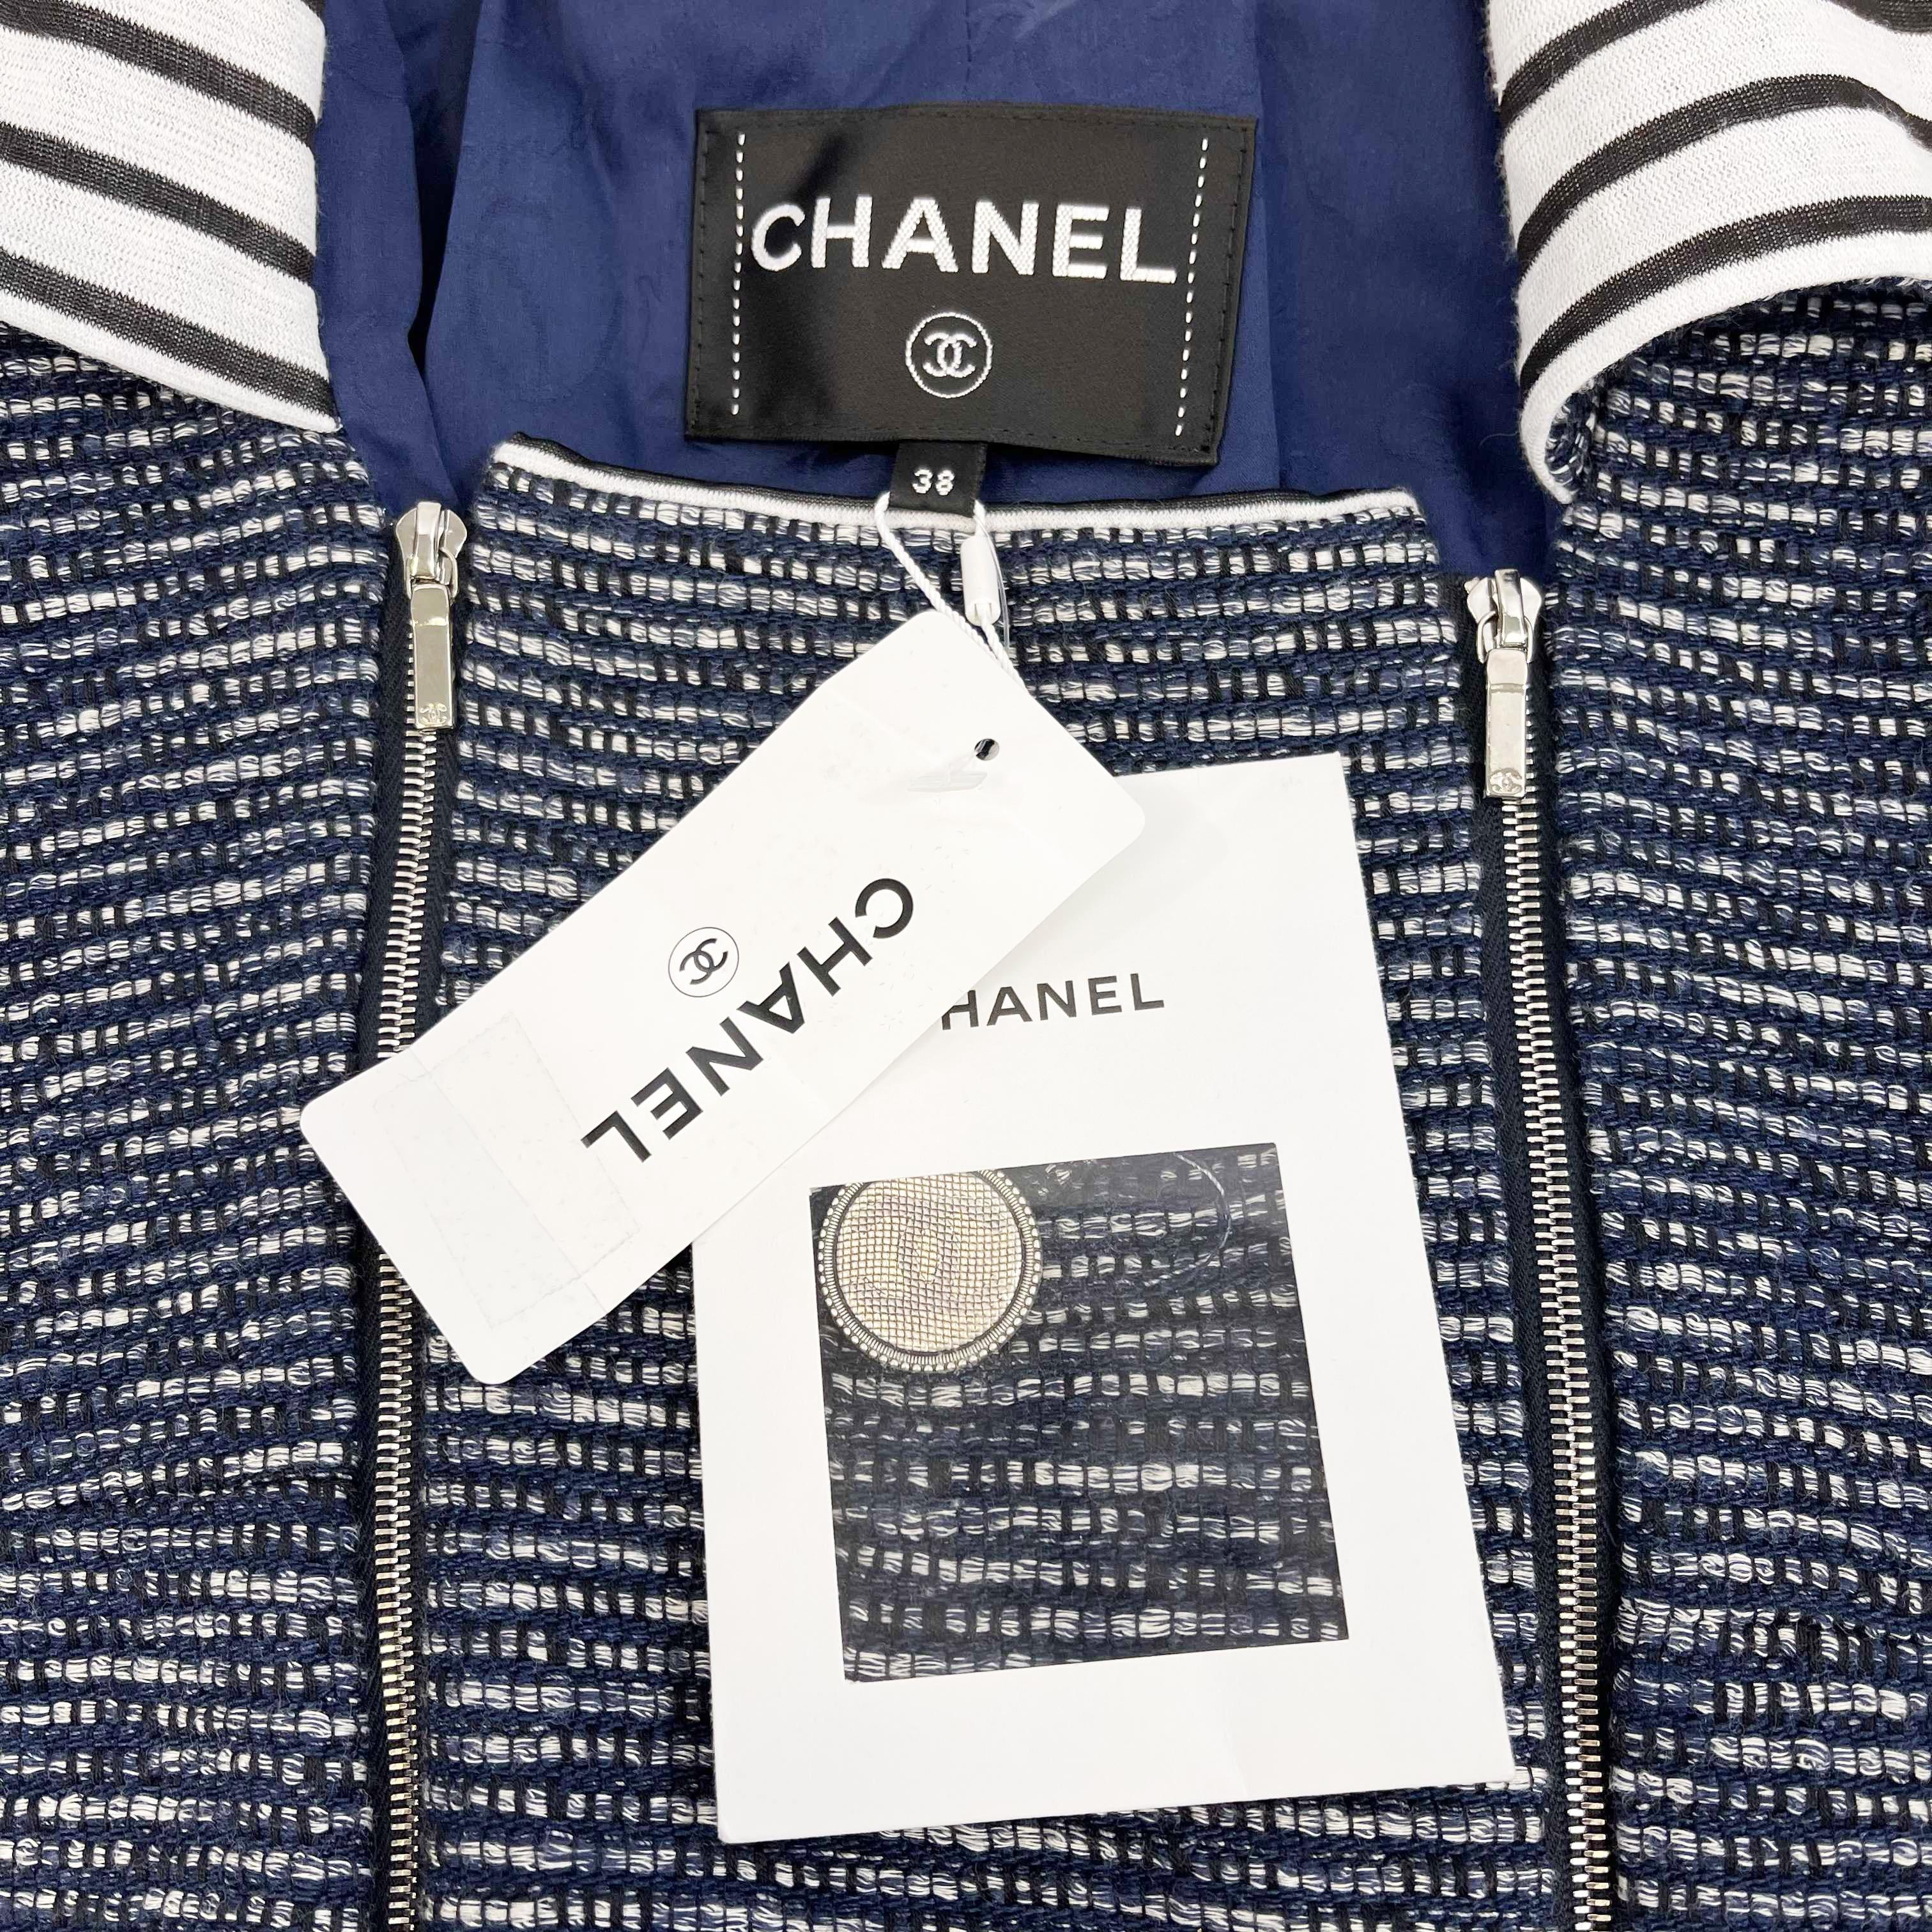 CHANEL- Spring 2017 Fantasy Tweed Coat - Navy & White - 38 US 6 NWT For Sale 5